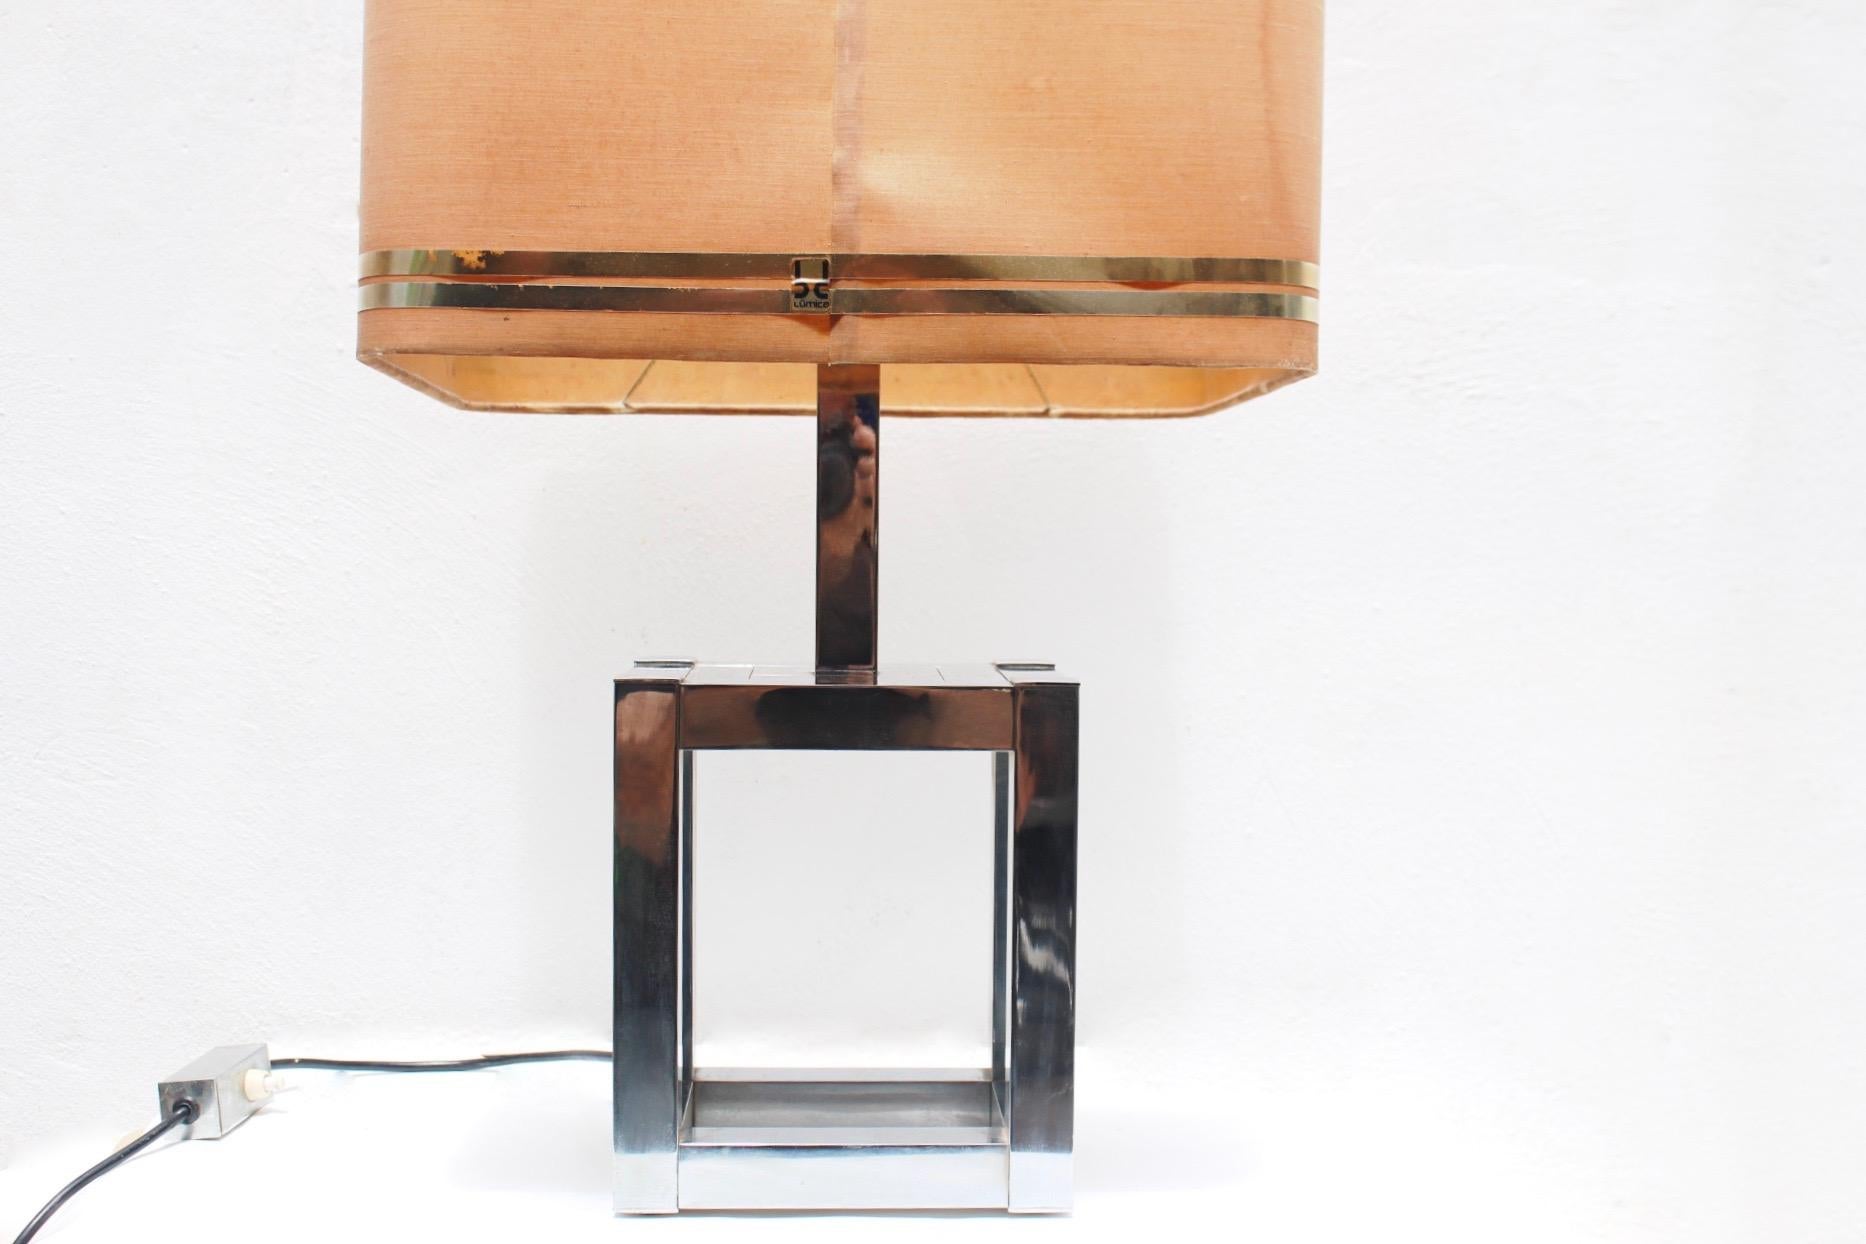 Midcentury Willy Rizzo Sculptural Cubic Sculptural Table Lamp for Lumica, 1970s For Sale 9